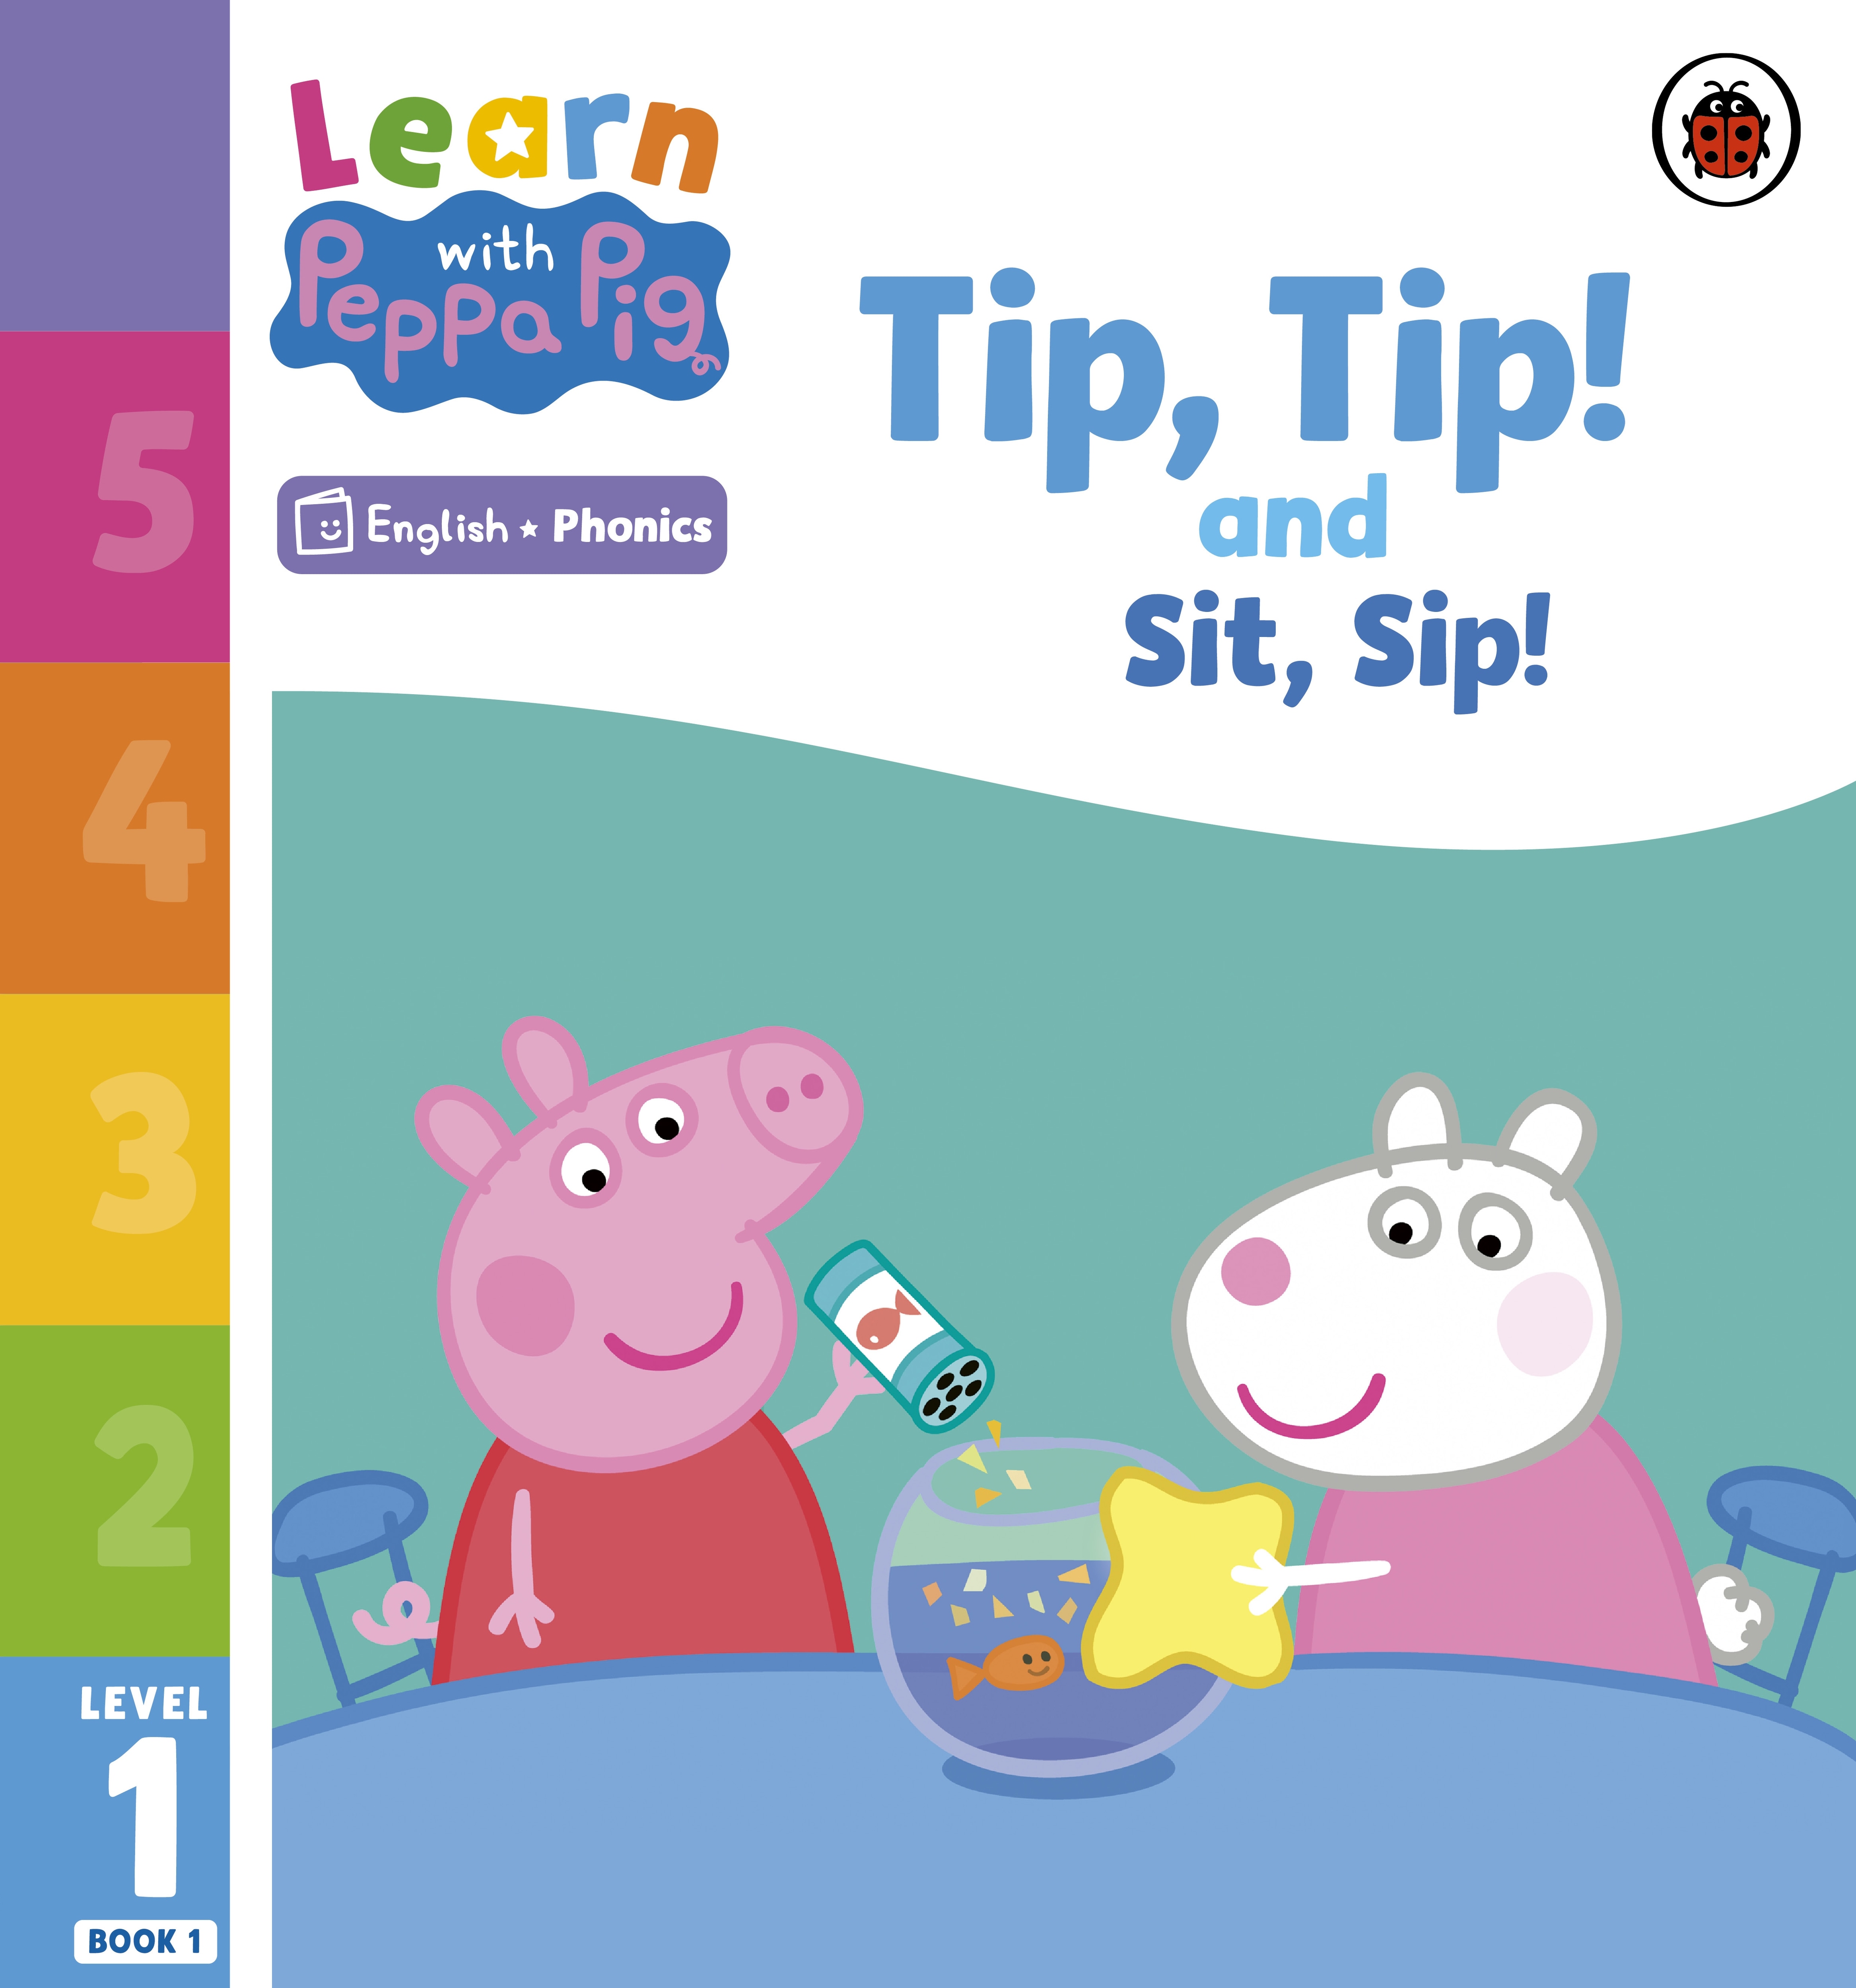 Learn with Peppa Phonics Level 1 Book 1 — Tip Tip and Sit Sip (Phonics Reader)